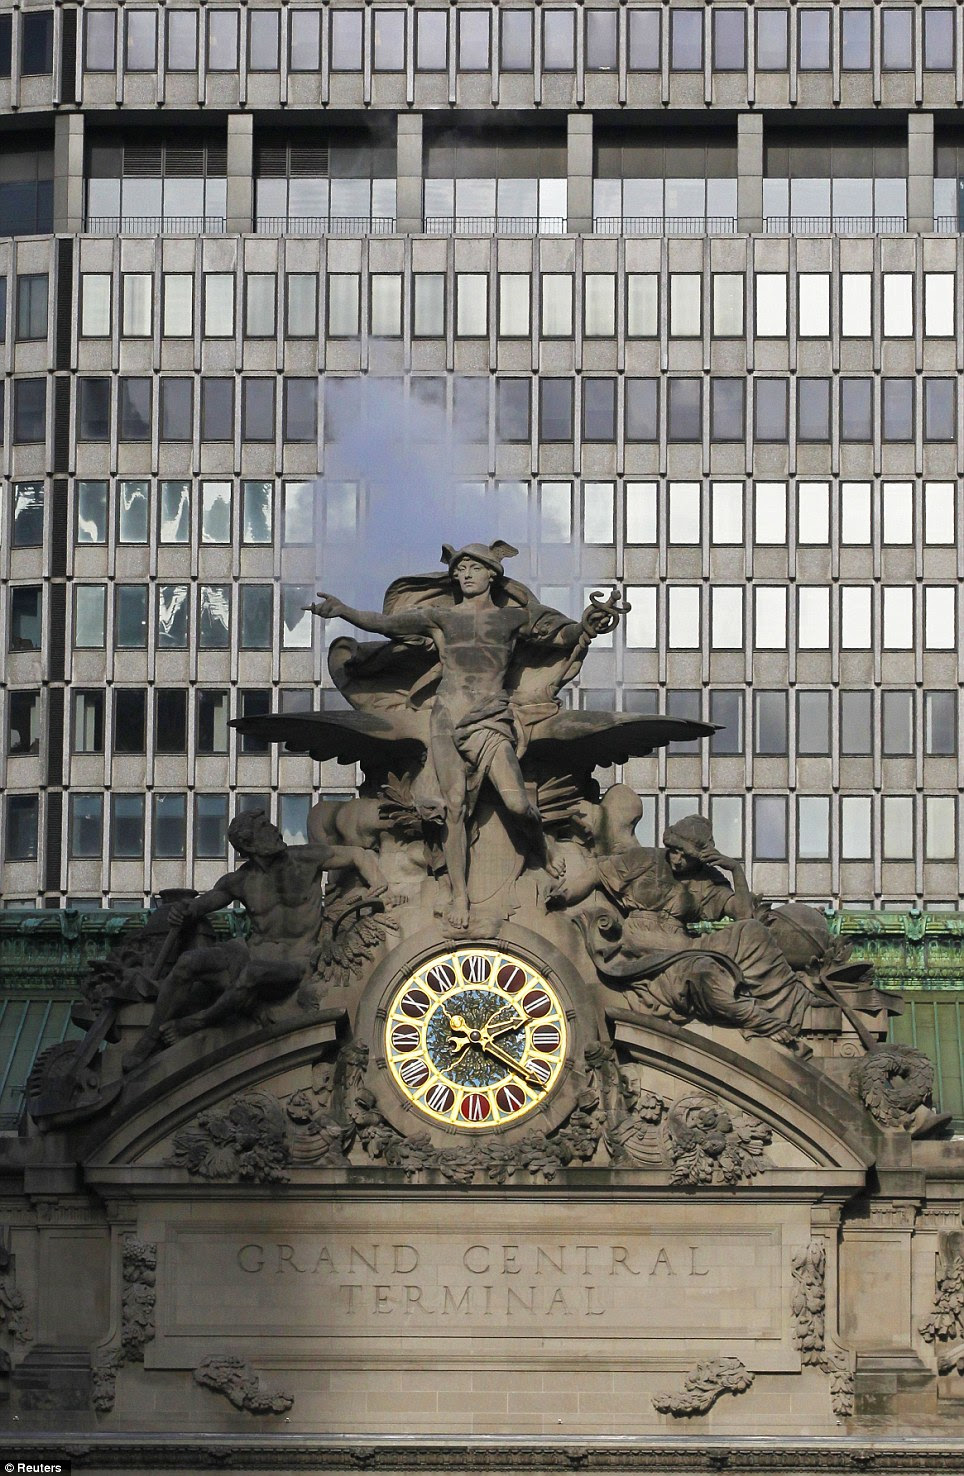 Steam rises behind the sculptures by the John Donnelly Company of Minerva, Hercules, and Mercury over Park Ave and 42nd St. at Grand Central Terminal